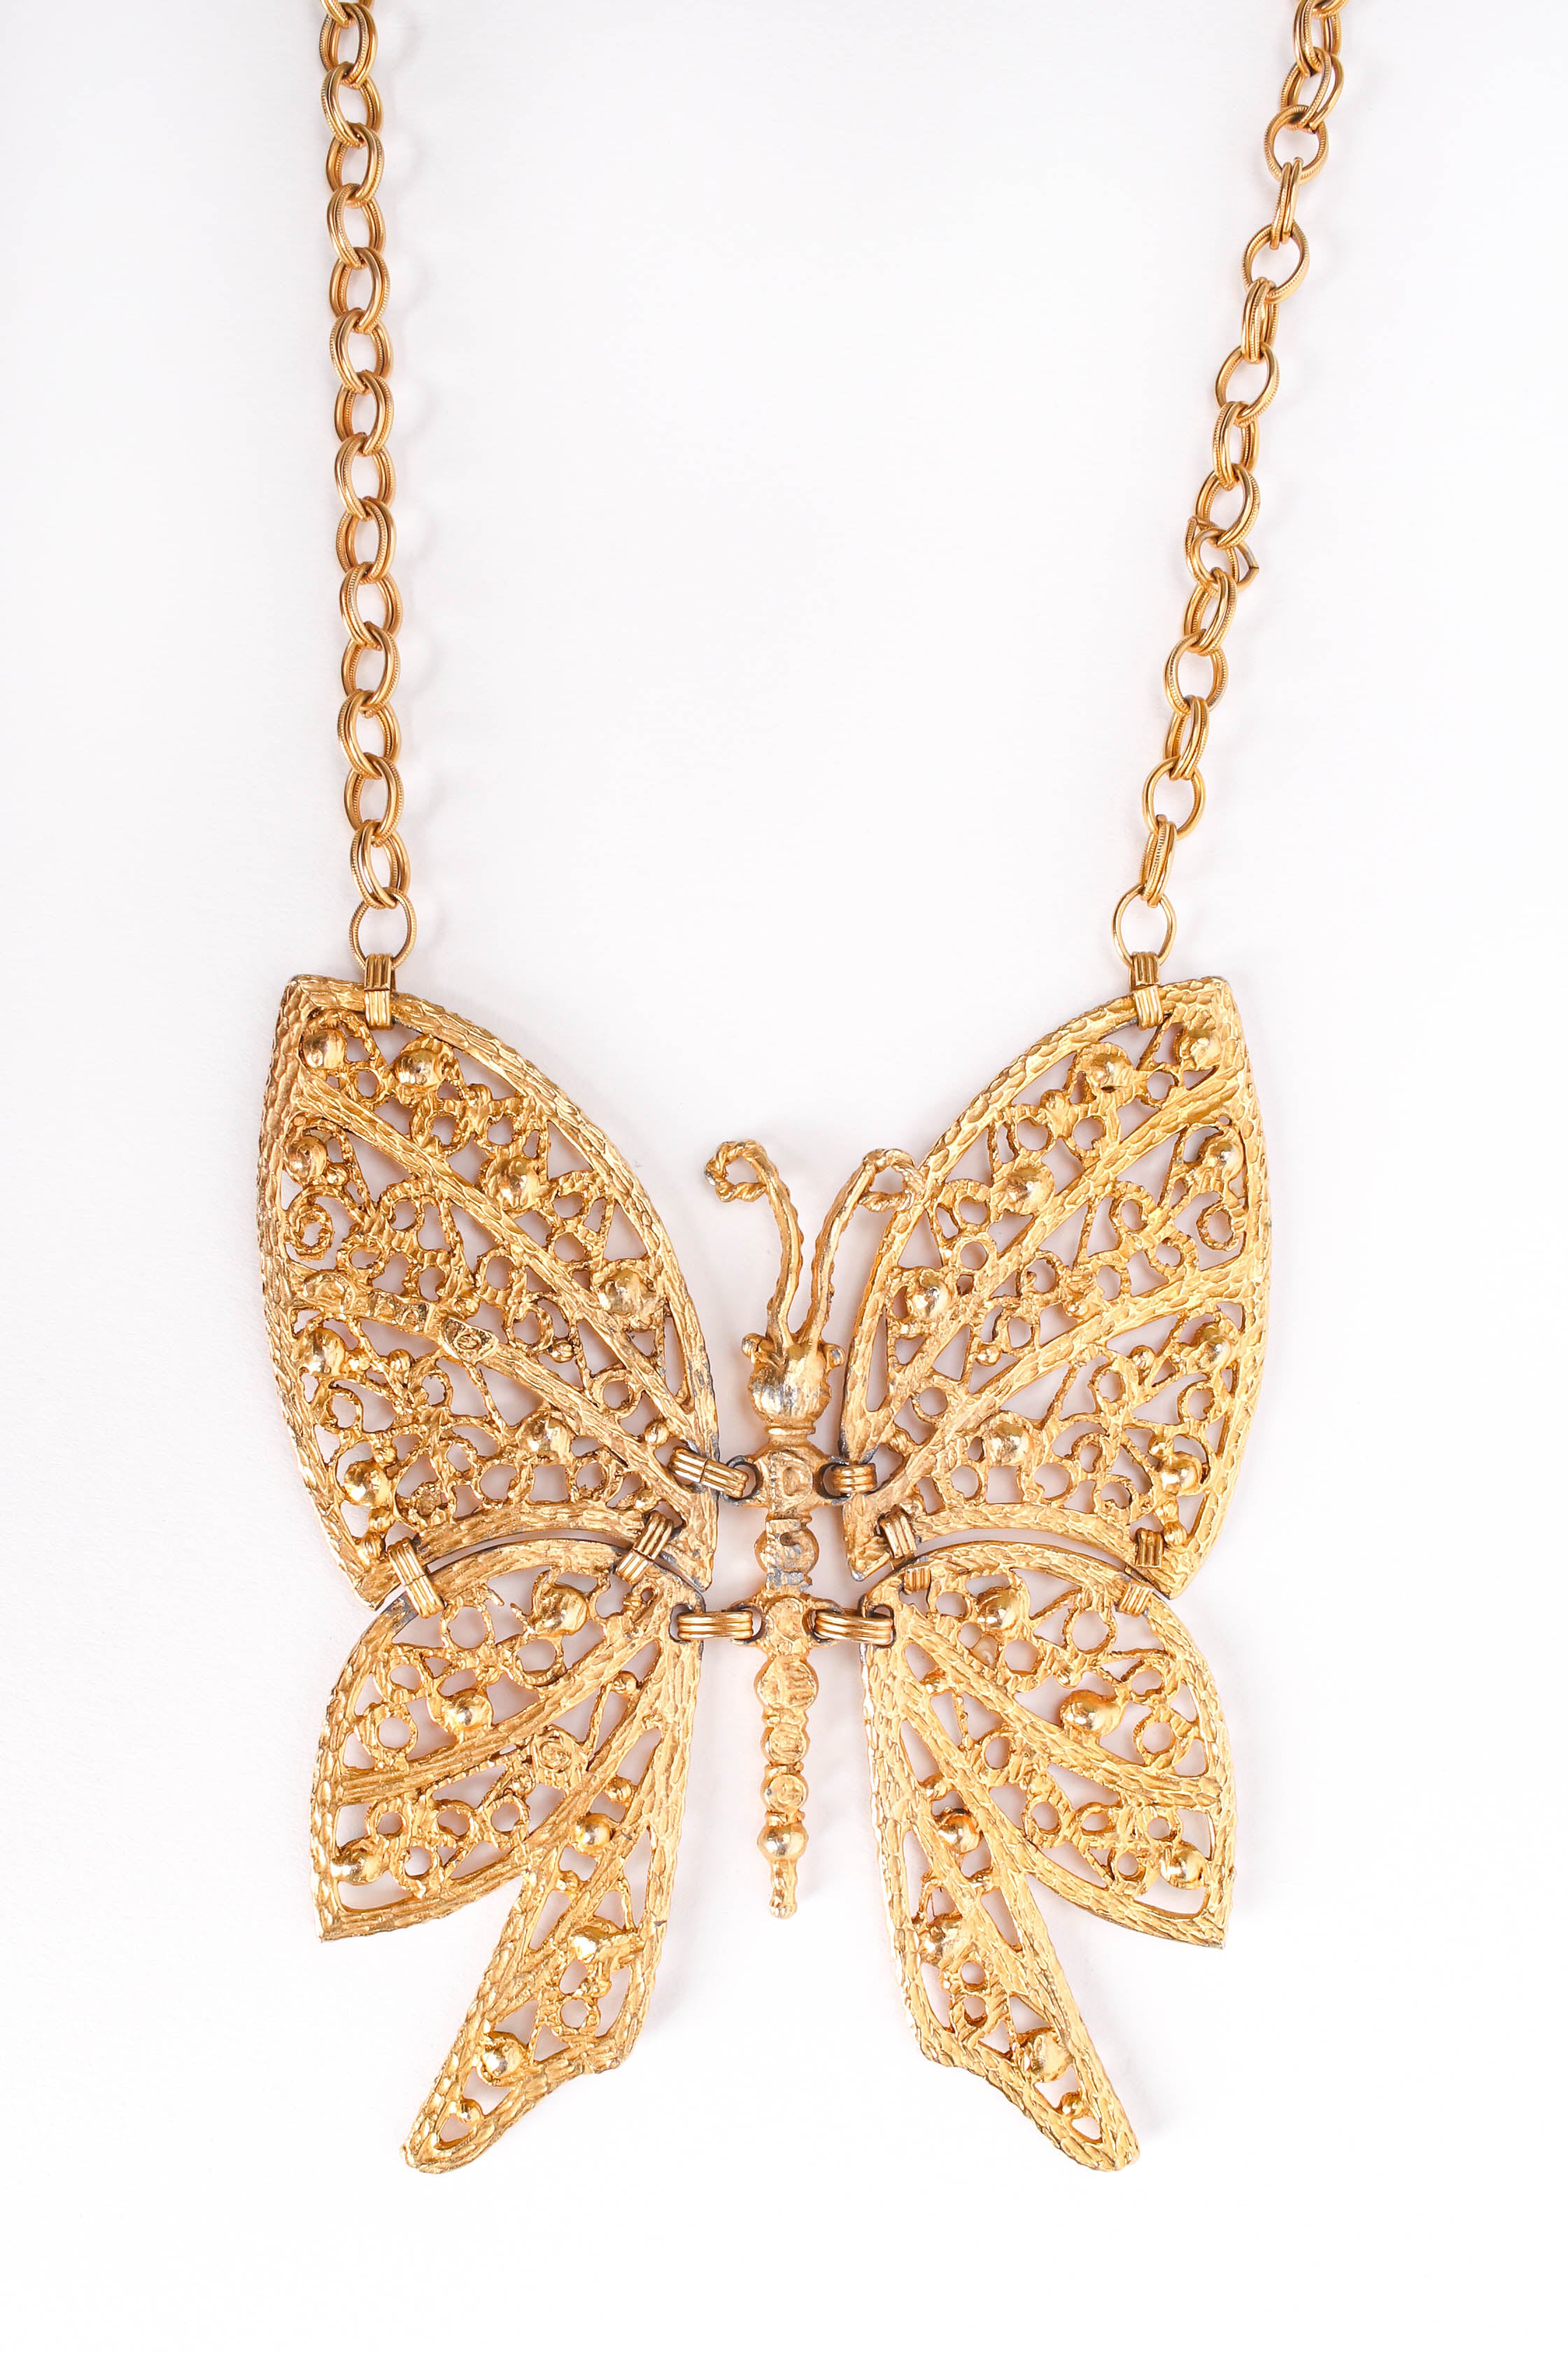 Vintage Swallowtail Filigree Butterfly Necklace back pendent detail @ Recess LA